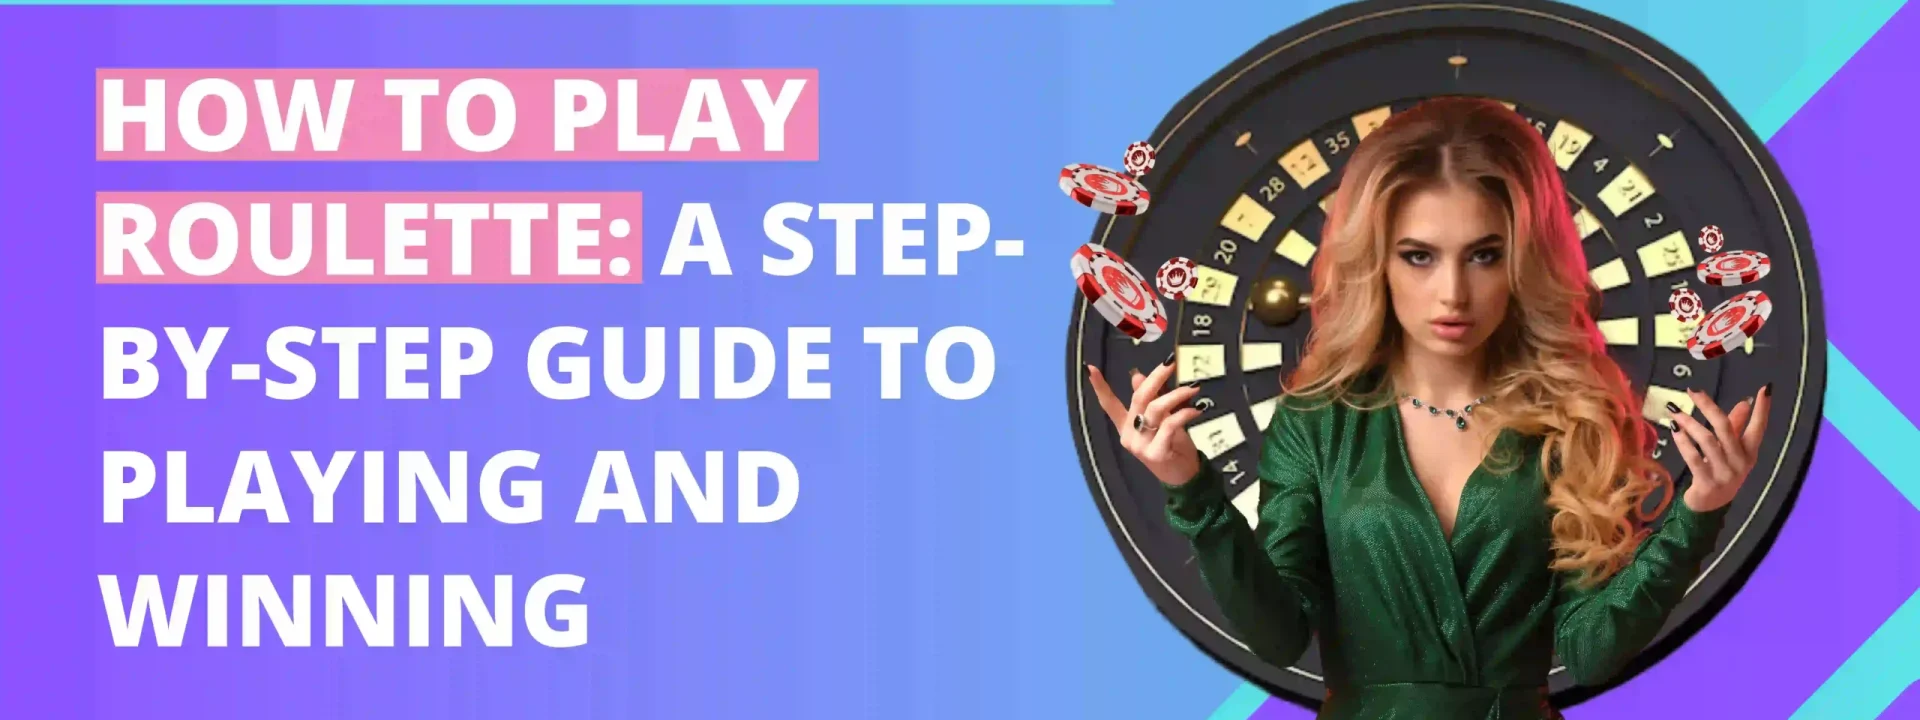 How to Play Roulette: A Step-By-Step Guide to Playing and Winning